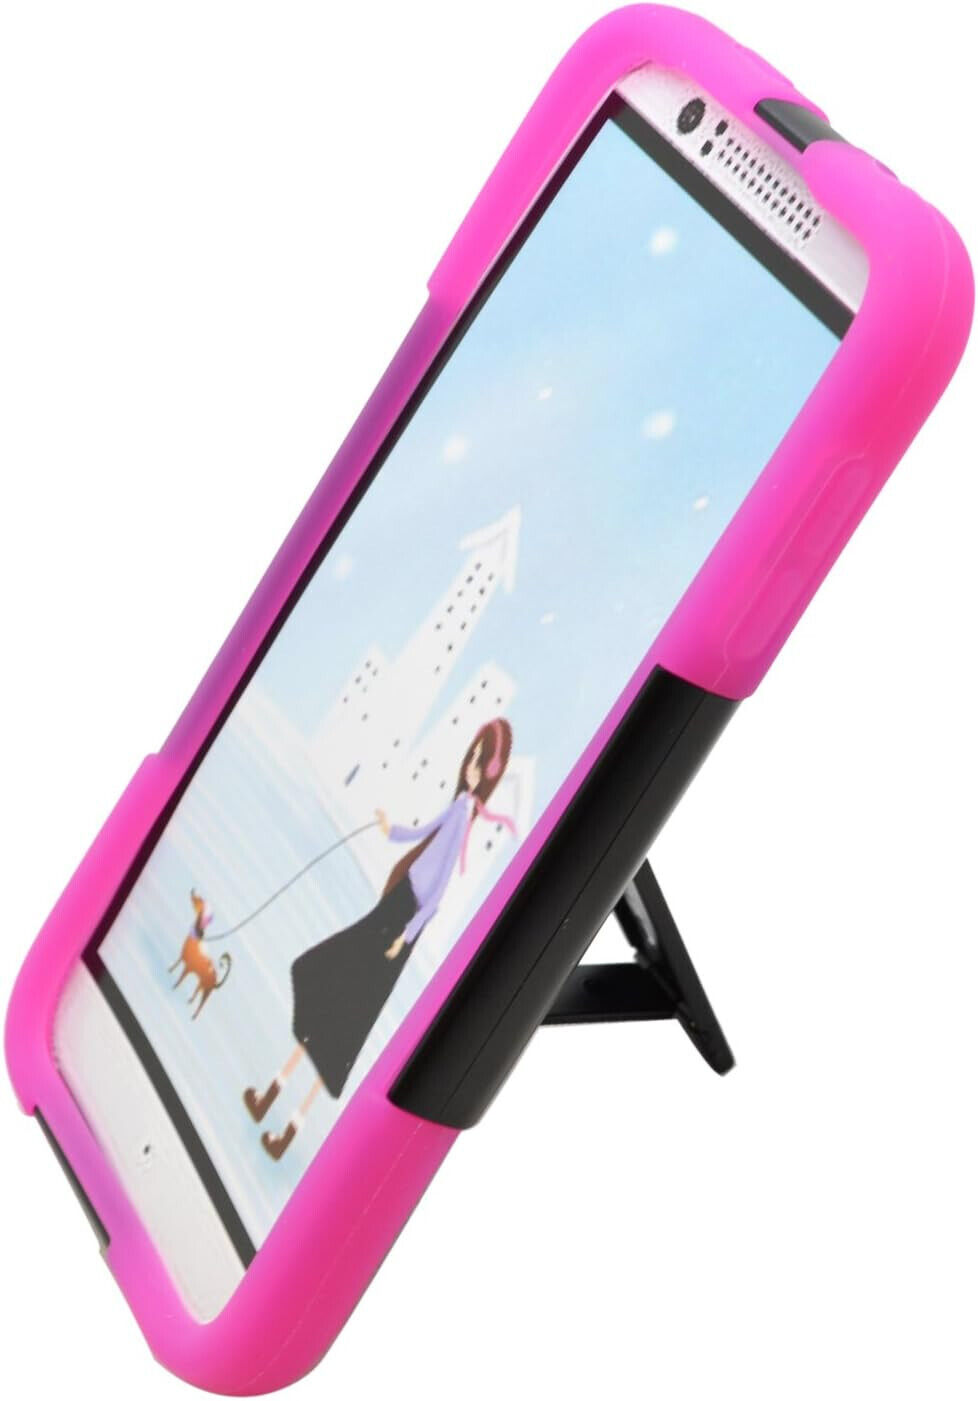 Hybrid Protective Case with Stand for HTC Desire 510 - Hot Pink/Black Unbranded D510-ABKPK - фотография #3